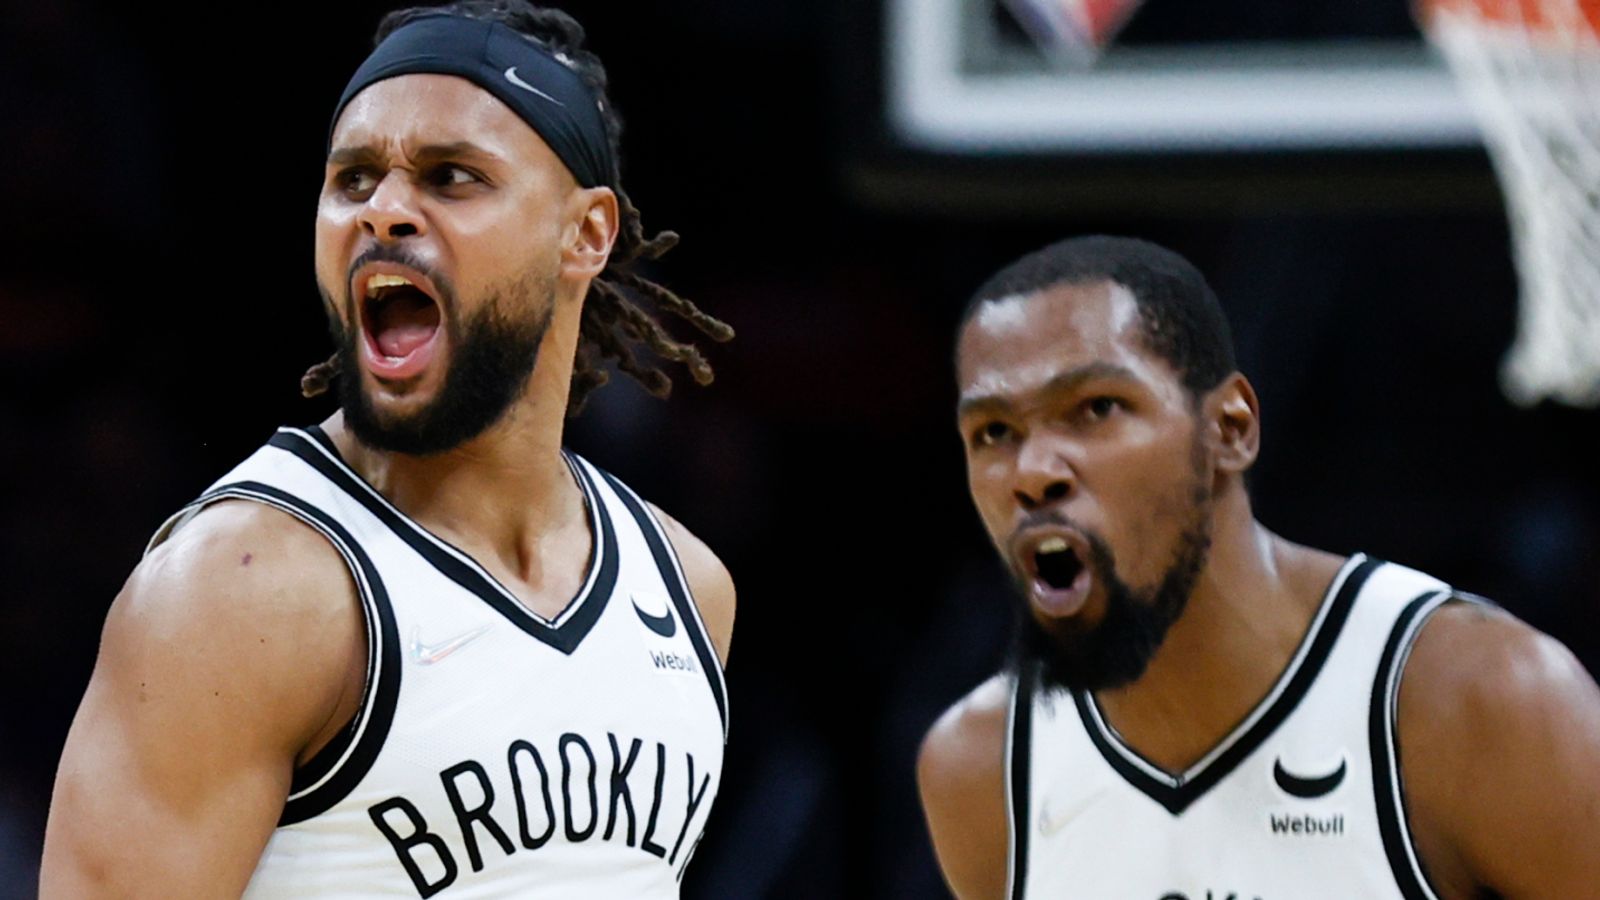 Patty Mills exceeding expectations with Brooklyn Nets